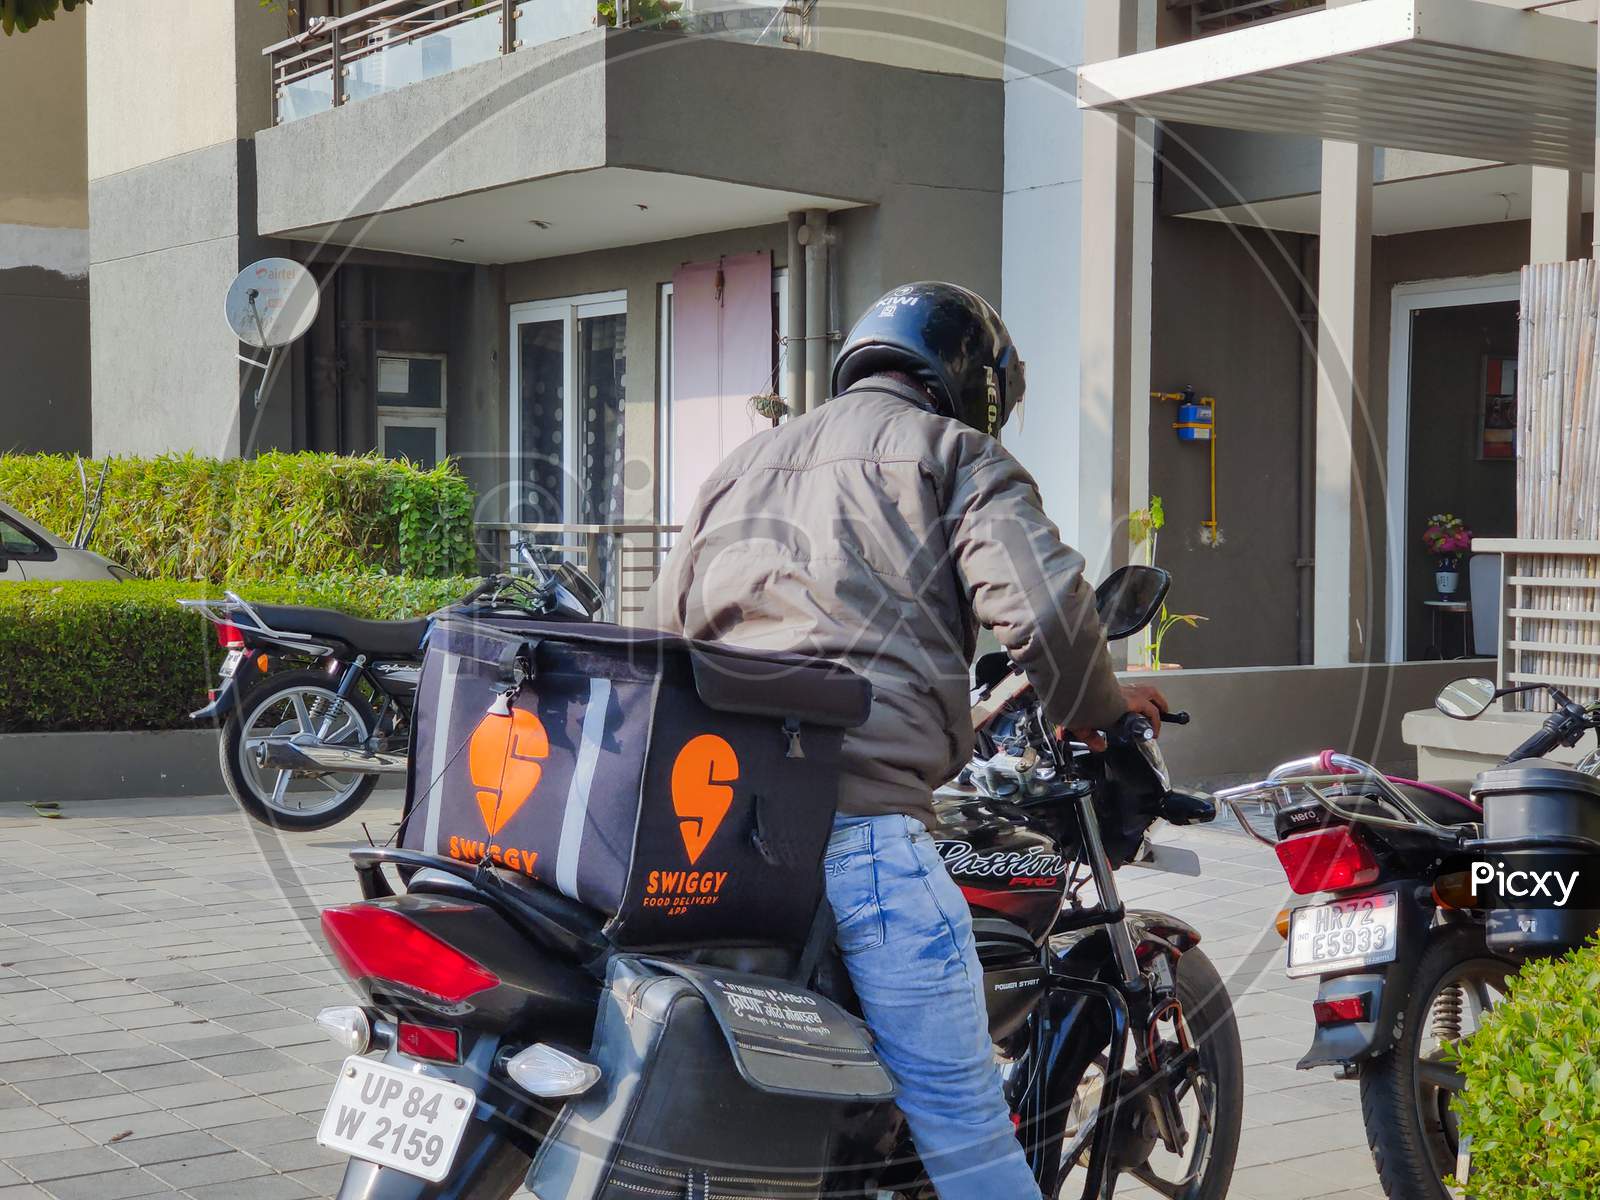 Rider On Bike With Black And Orange Swiggy Food Delivery Bag Hotcase Getting Ready To Deliver Food And Groceries For The Food Tech Unicorn Startup